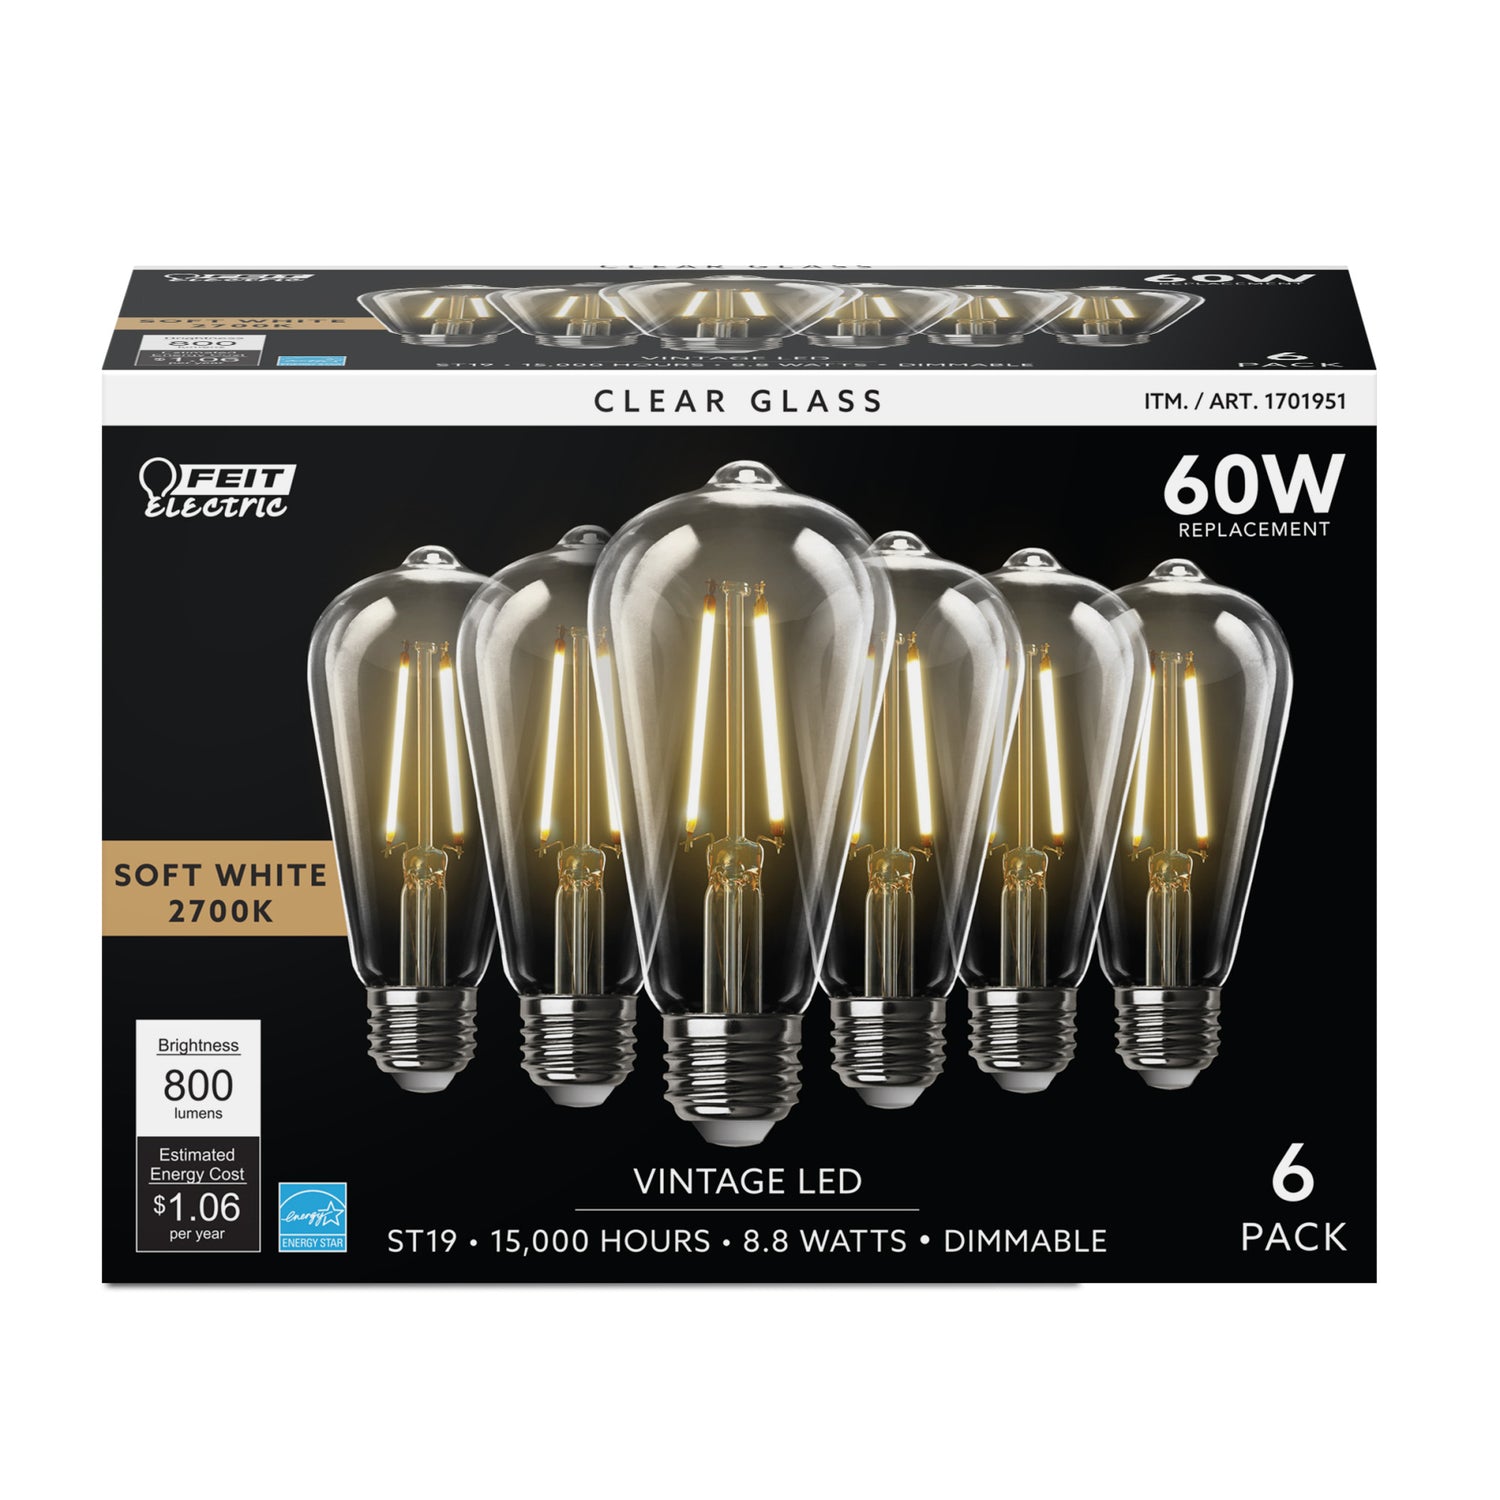 8.8W (60W Replacement) ST19 E26 Dimmable Straight Filament Clear Glass Vintage Edison LED Light Bulb, Soft White (6-Pack)